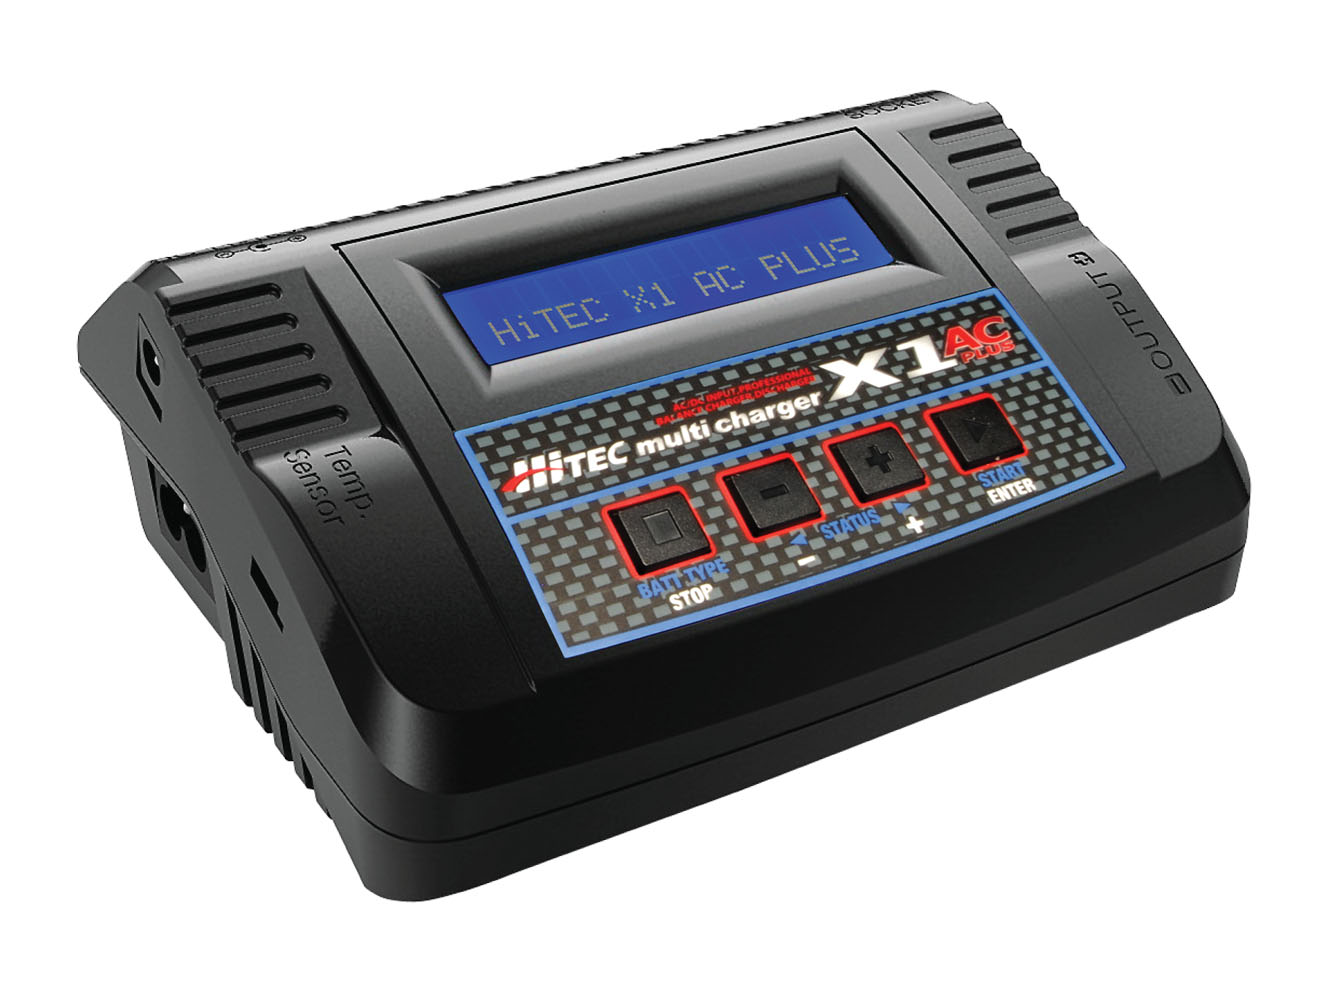 X1 AC Plus battery charger from Hitec - Model Airplane News